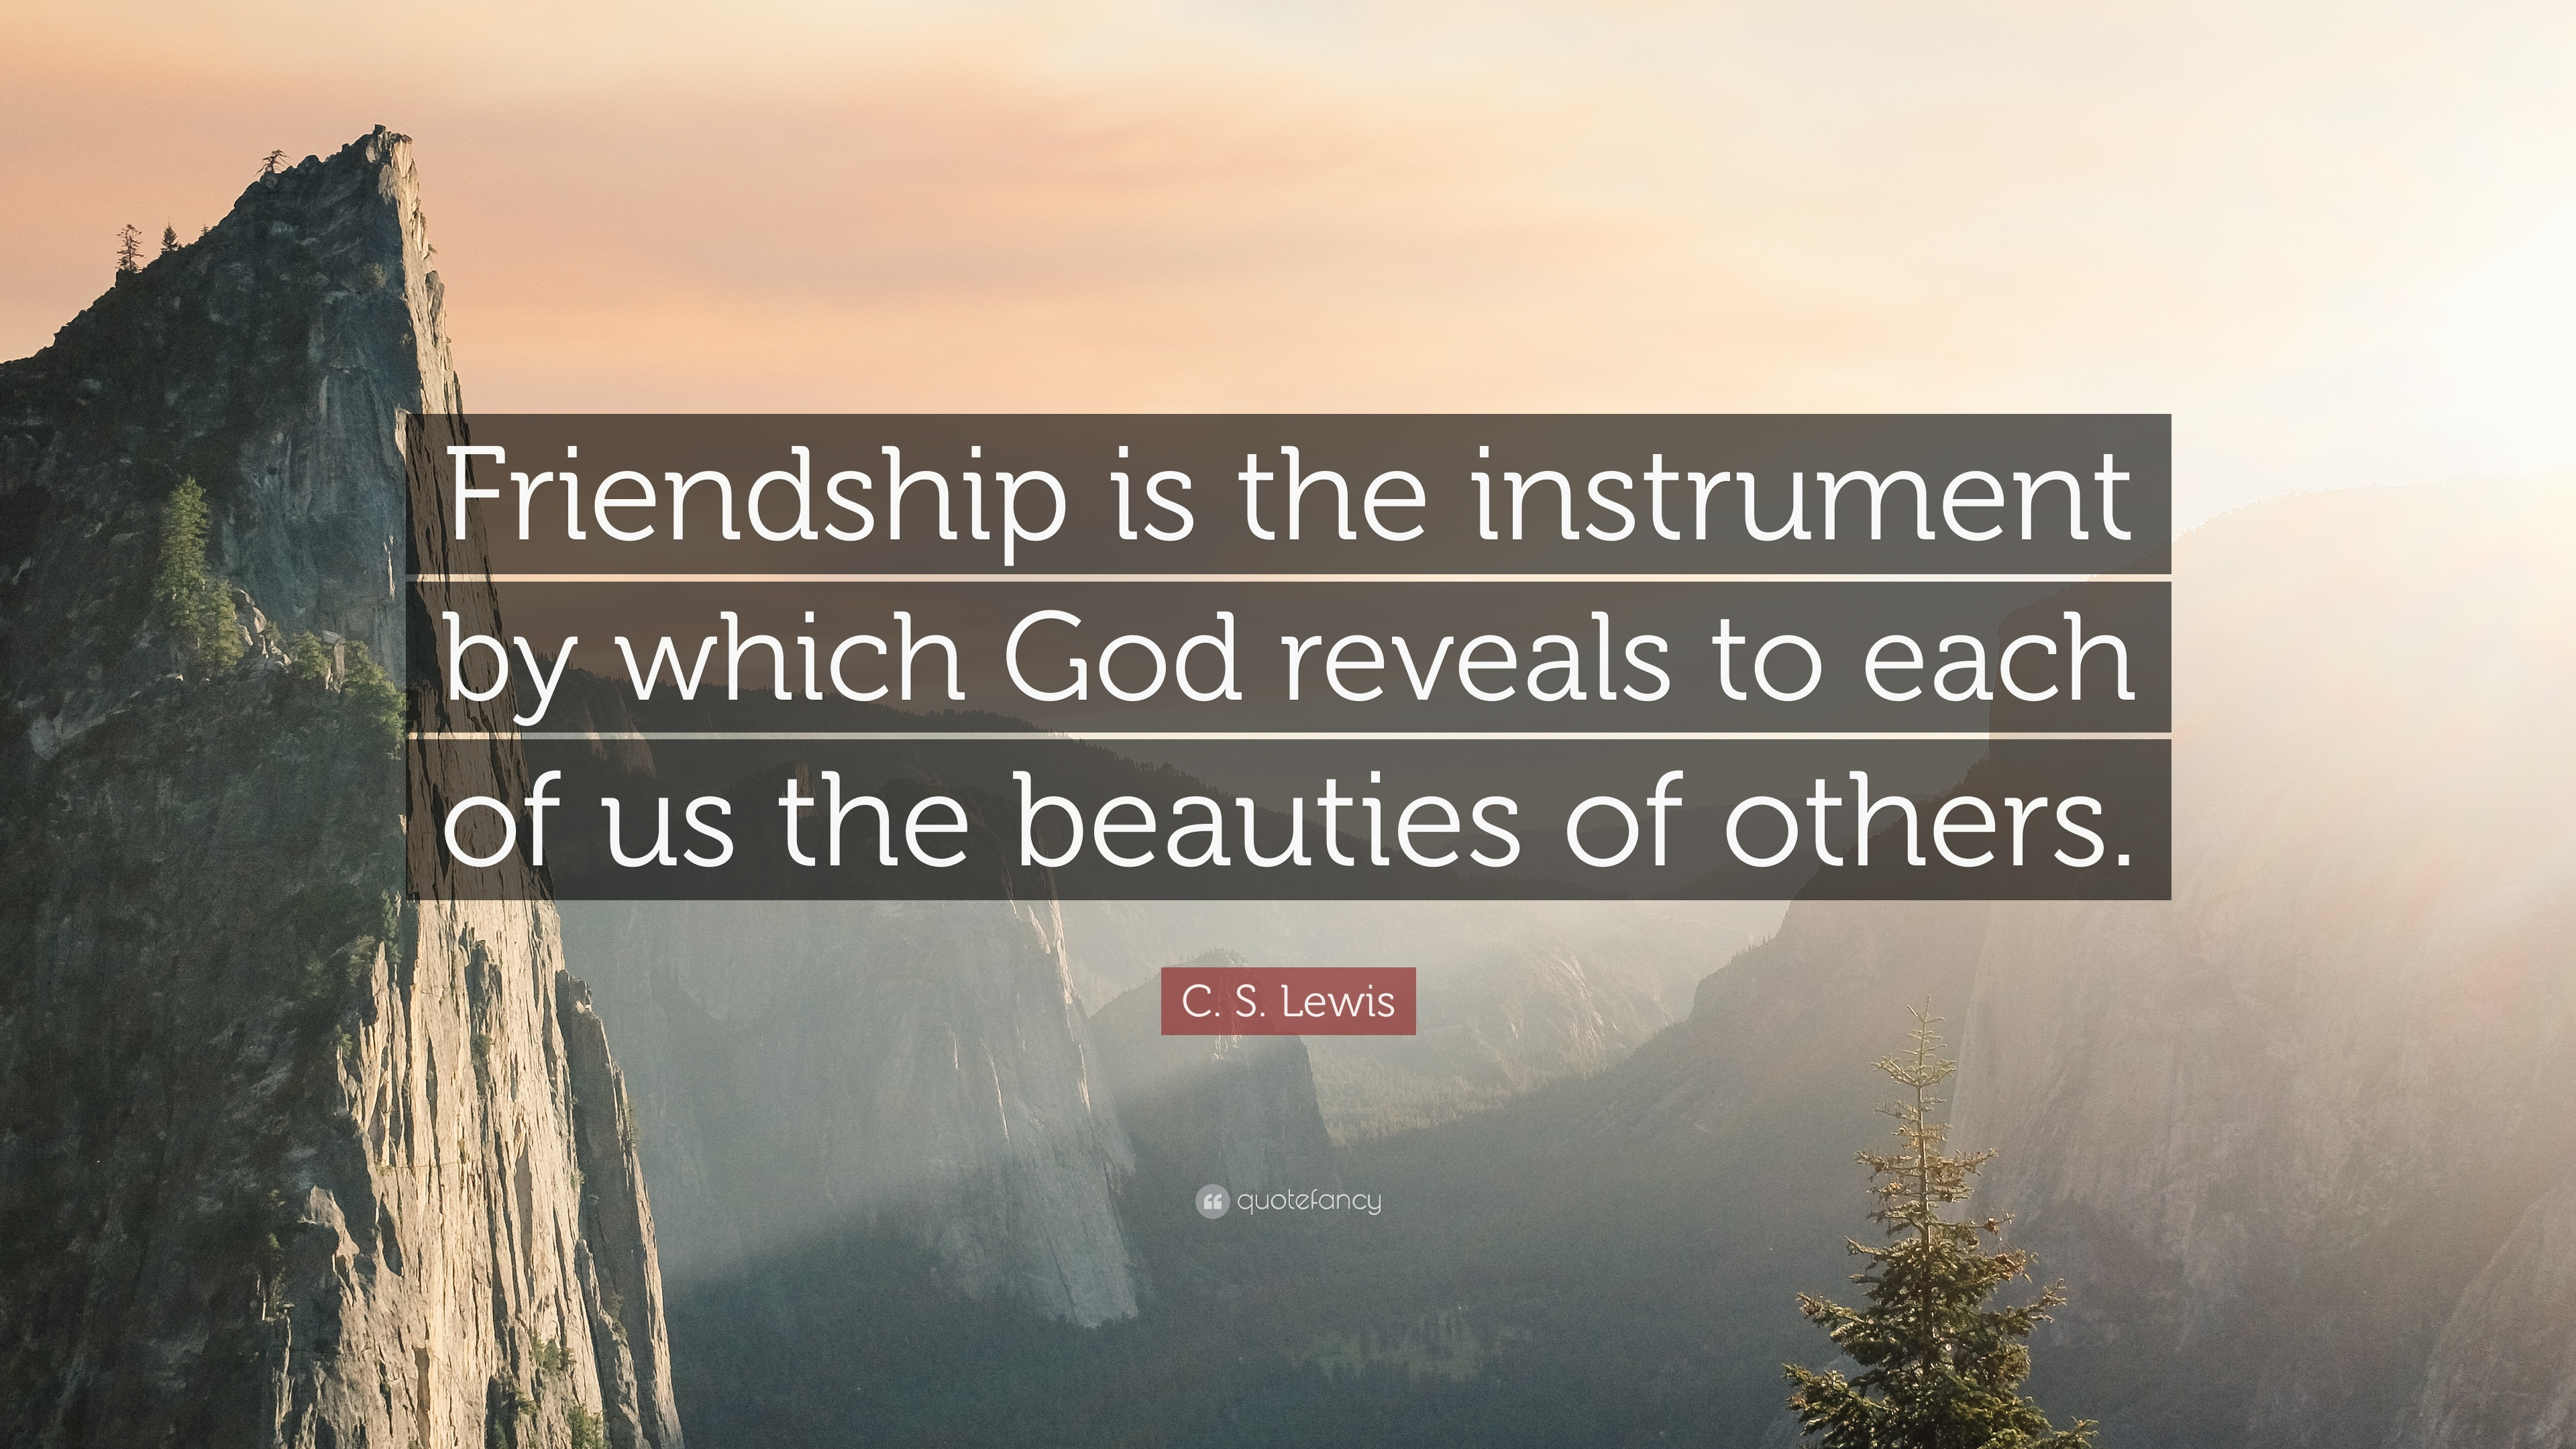 C.S.Lewis Quote On Friendship
 C S Lewis Quote “Friendship is the instrument by which